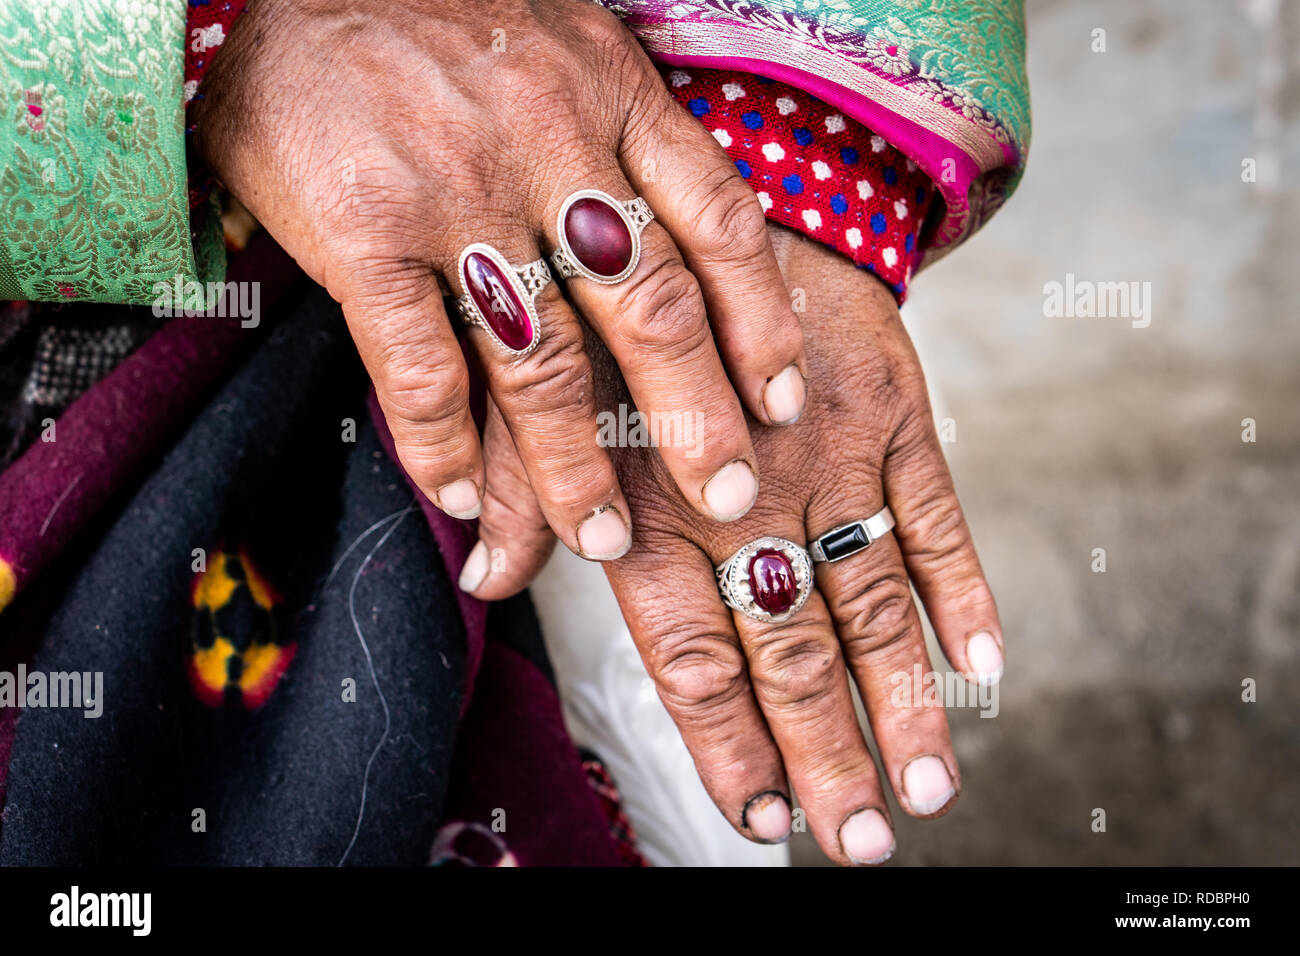 Close up on hands of elderly ethnic Indian woman with large rings on her fingers. Stock Photo